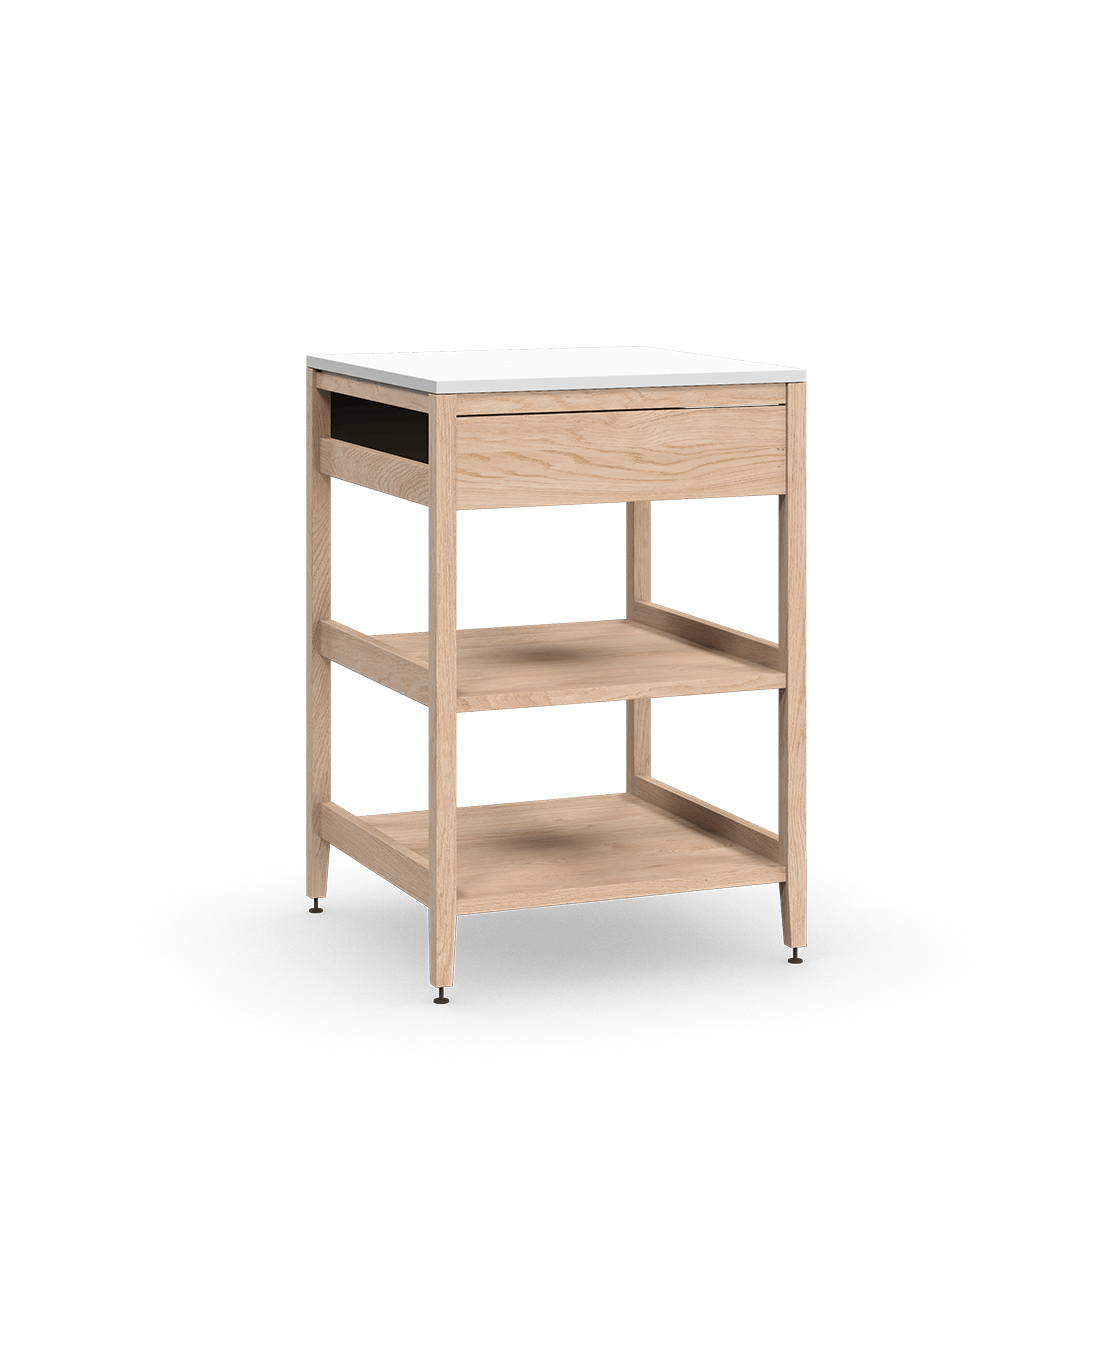 Coquo modular kitchen corner cabinet in natural oak, fix front + two wood shelves. 